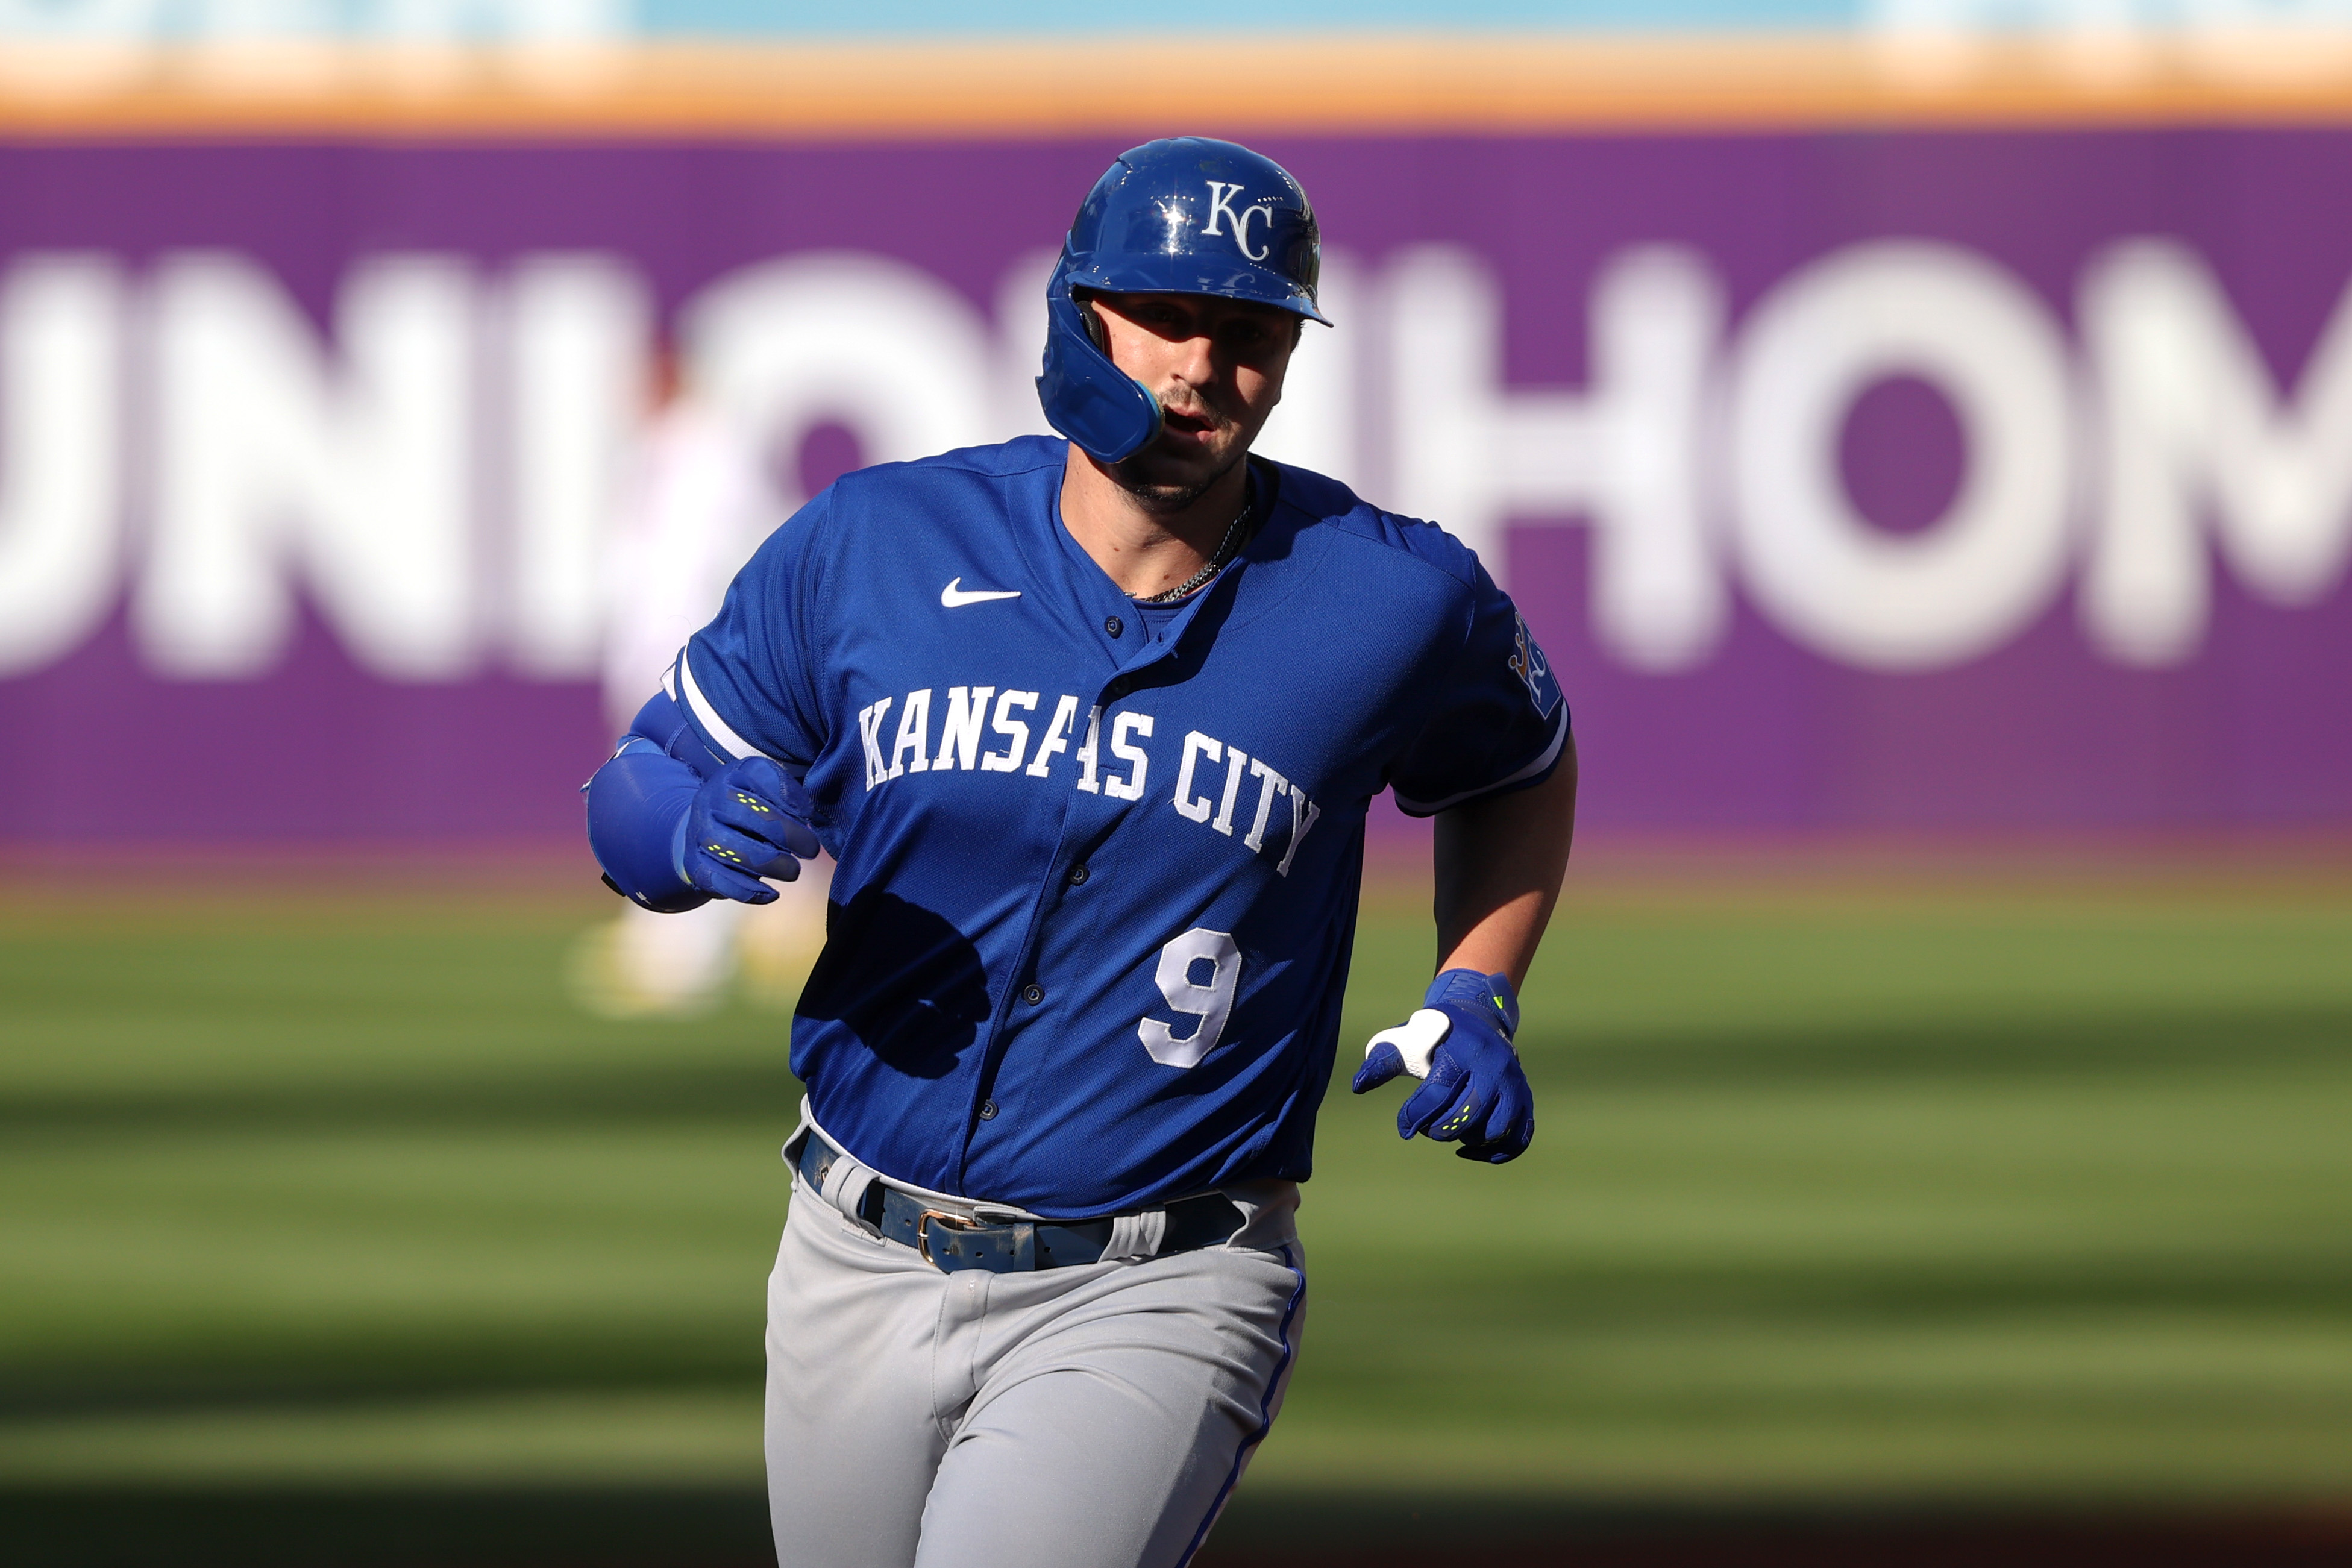 B/R Walk-Off on X: The Royals announced that Nicky Lopez and